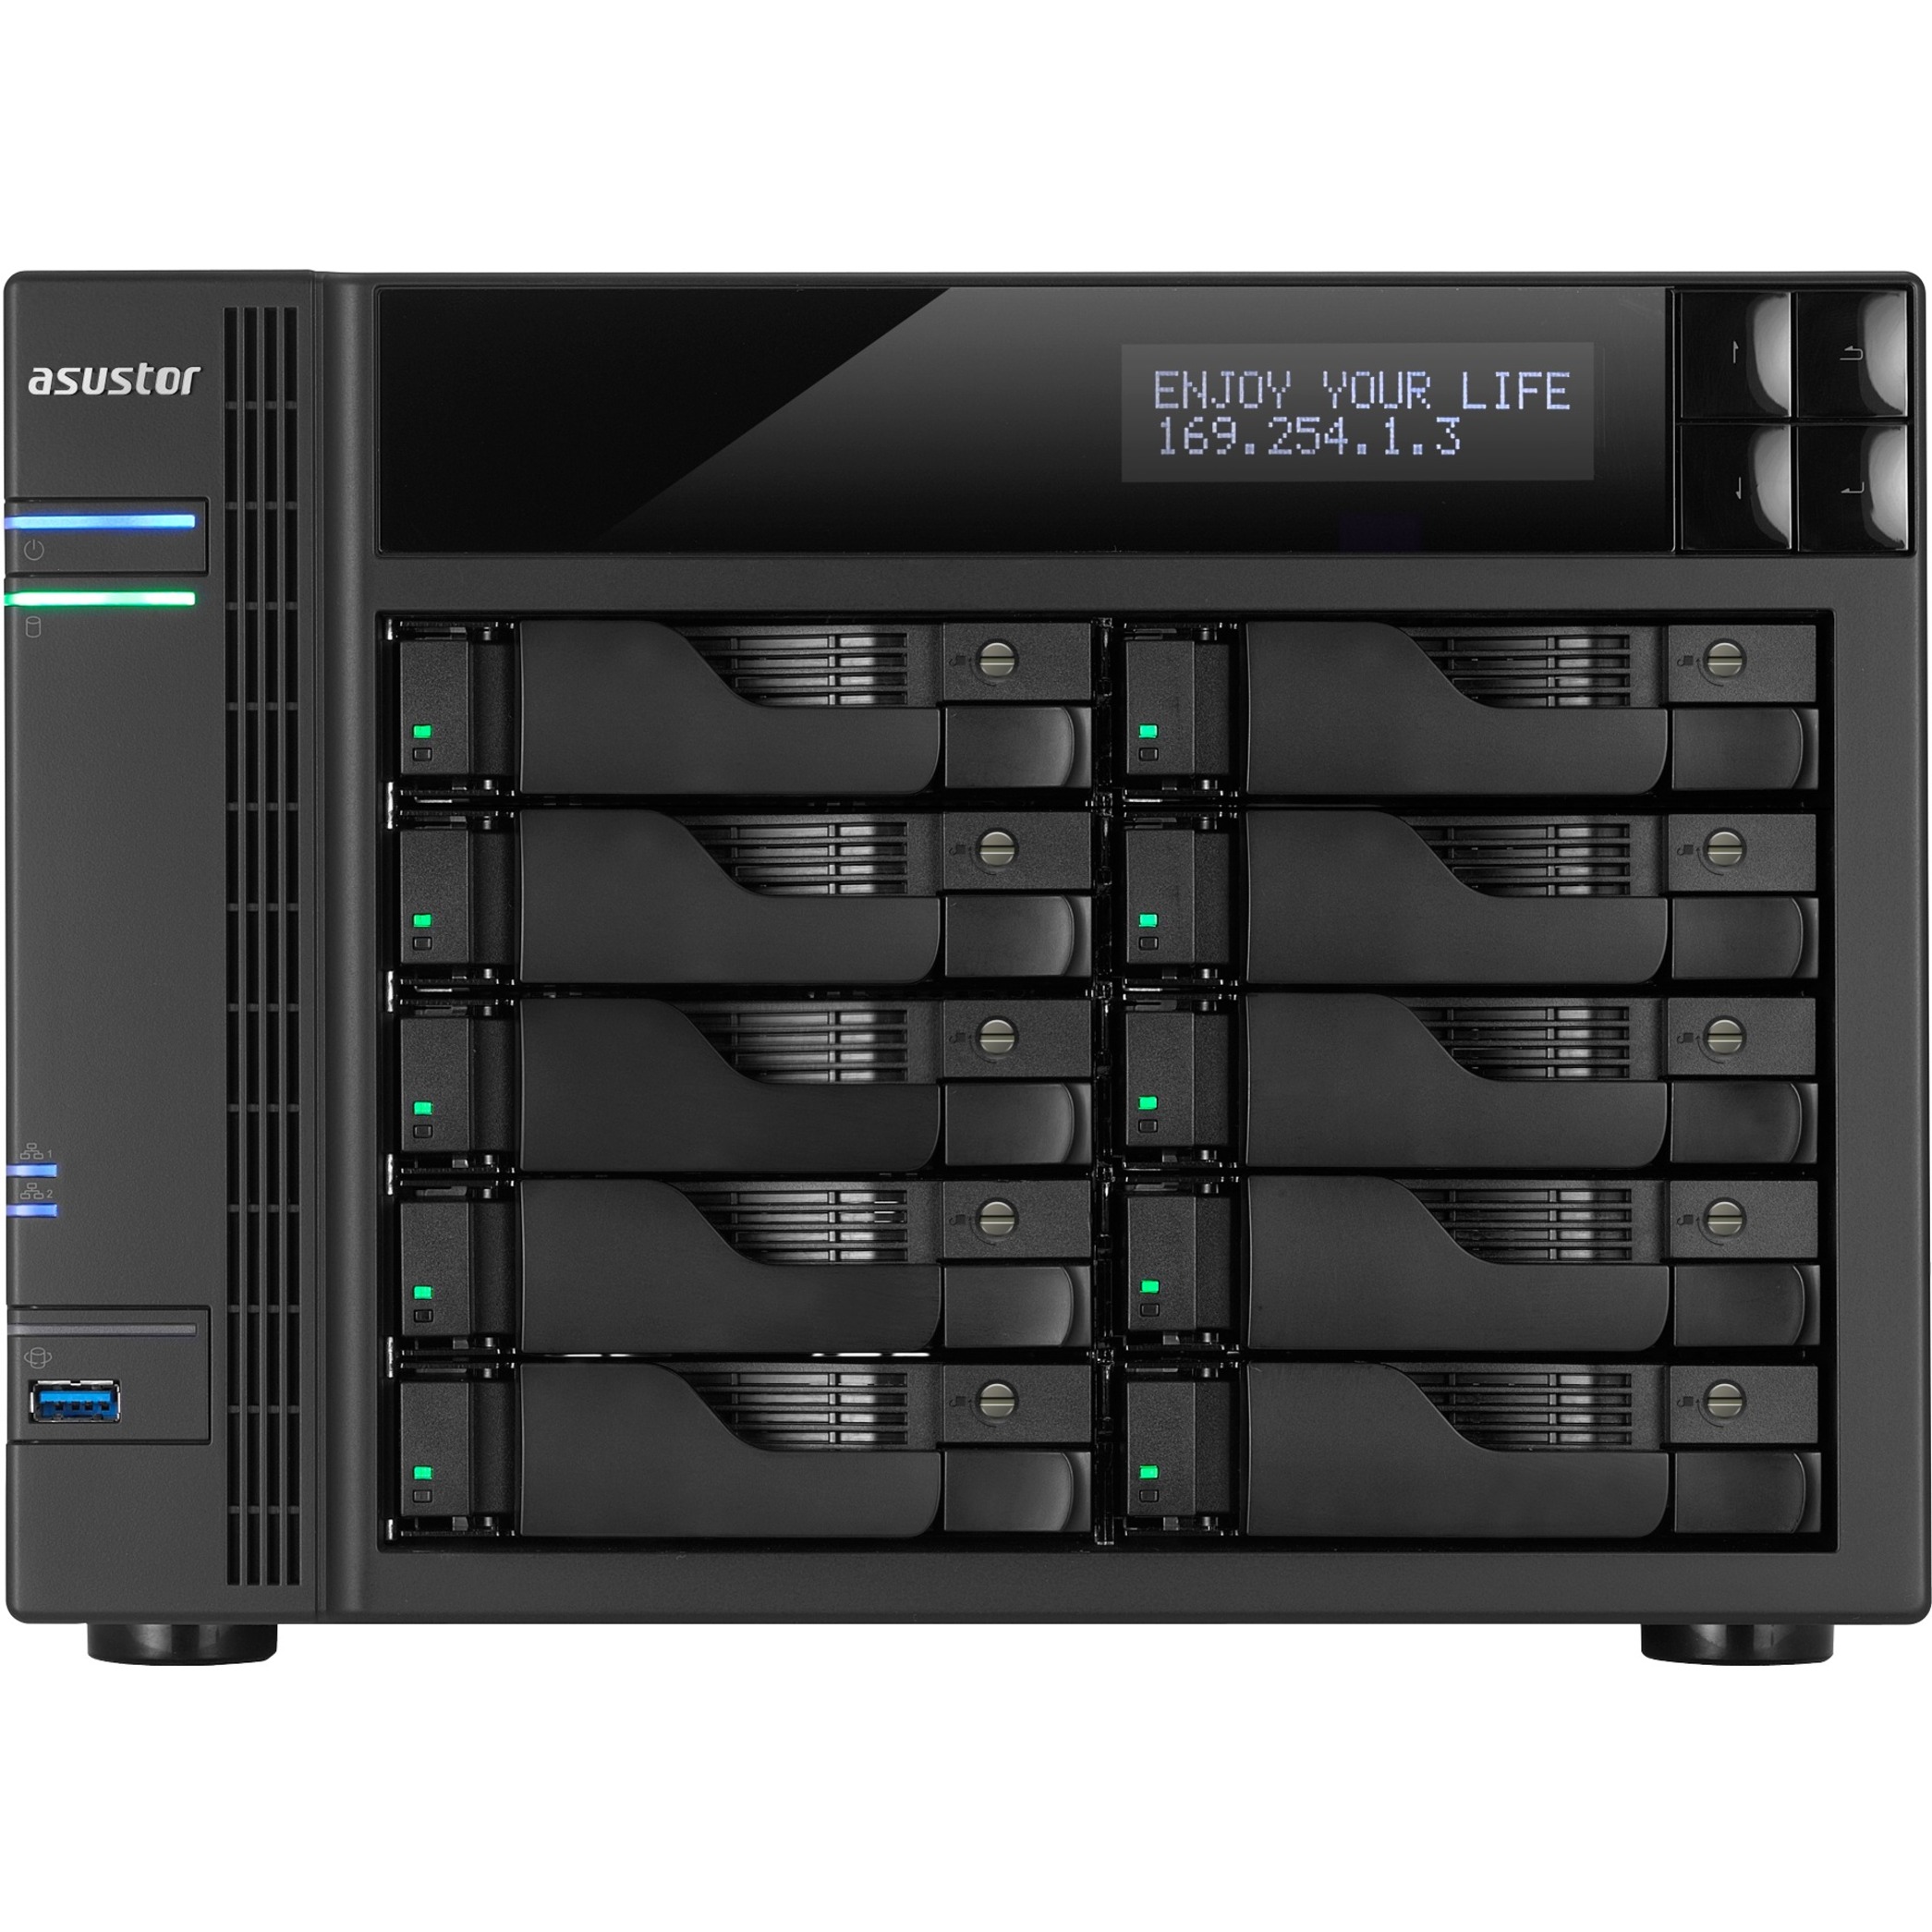 Asustor AS6210T 10-Bay NAS, Intel Celeron Quad-Core, 4 GB SO-DIMM DDR3L, GbE x 4, PCI-E (10GbE ready), USB 3.0 & eSATA, WoL, System Sleep Mode, AES-NI hardware encryption,with lockable tray - image 3 of 6